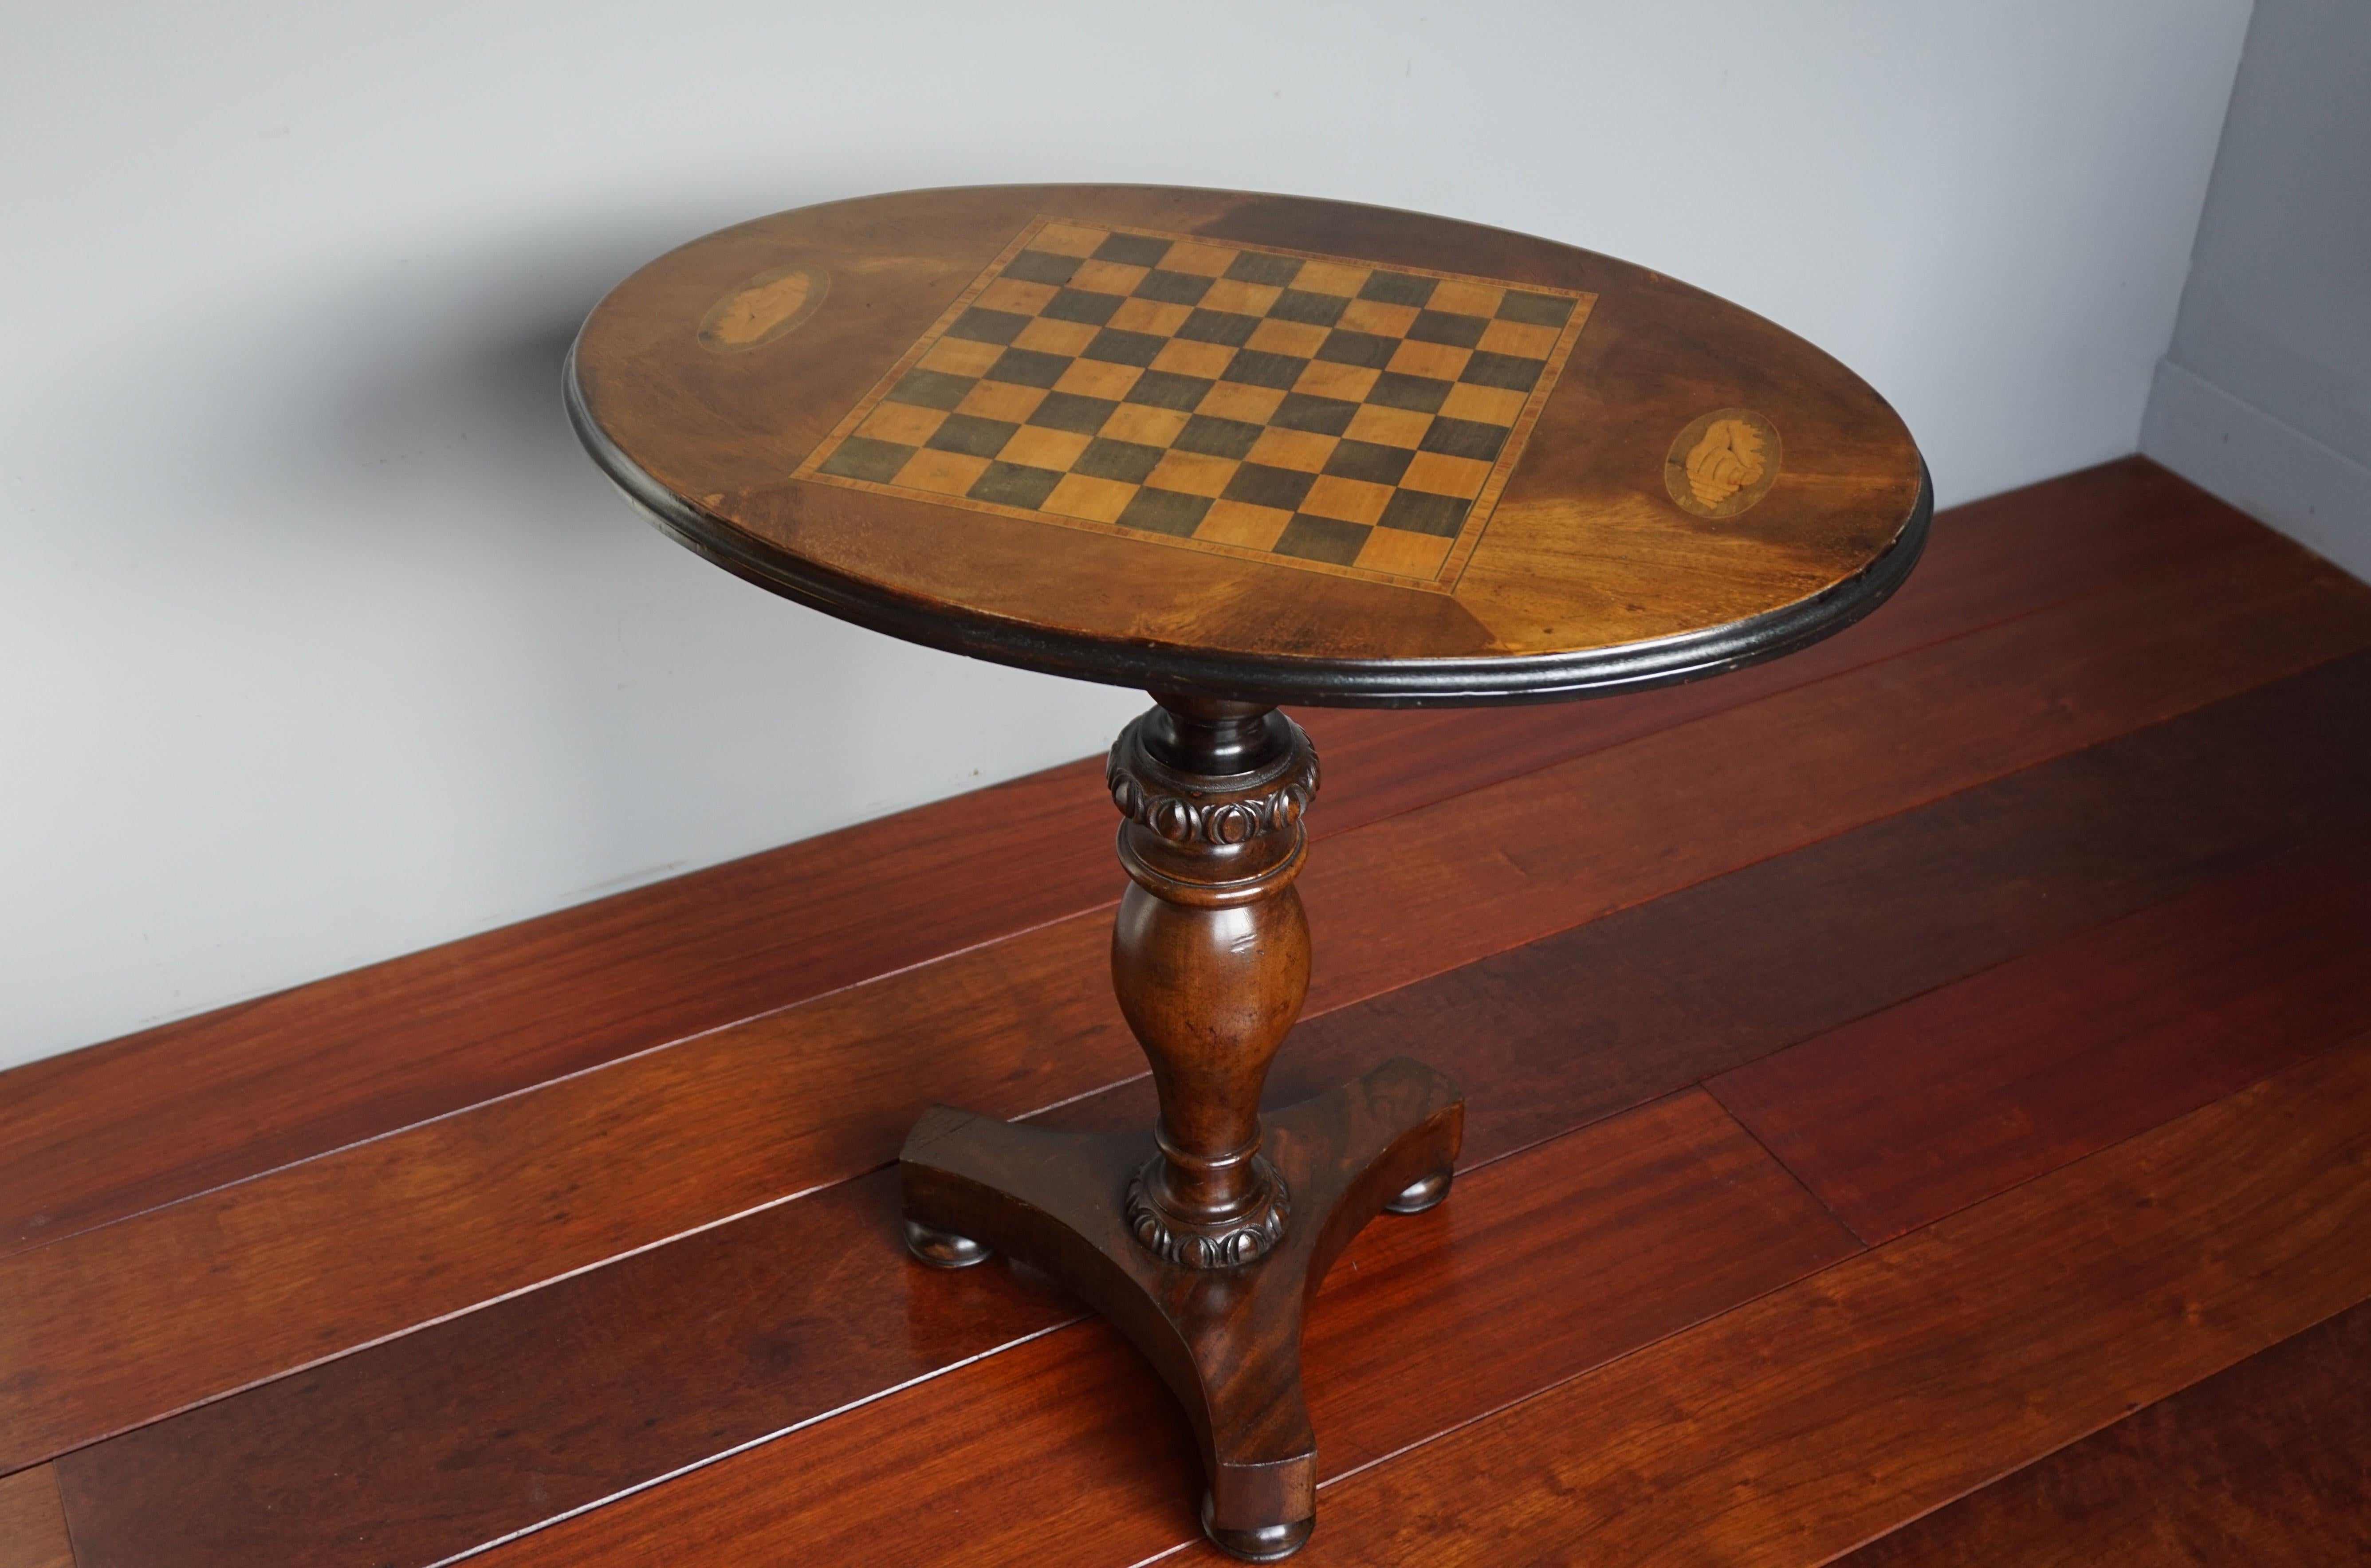 Stunning and practical size, oval chess table inlaid with satinwood.

If you are chess playing enthousiast and you like to play the game of chess with family or friends then this table could be perfect for you. Even if you hardly play at all, it is